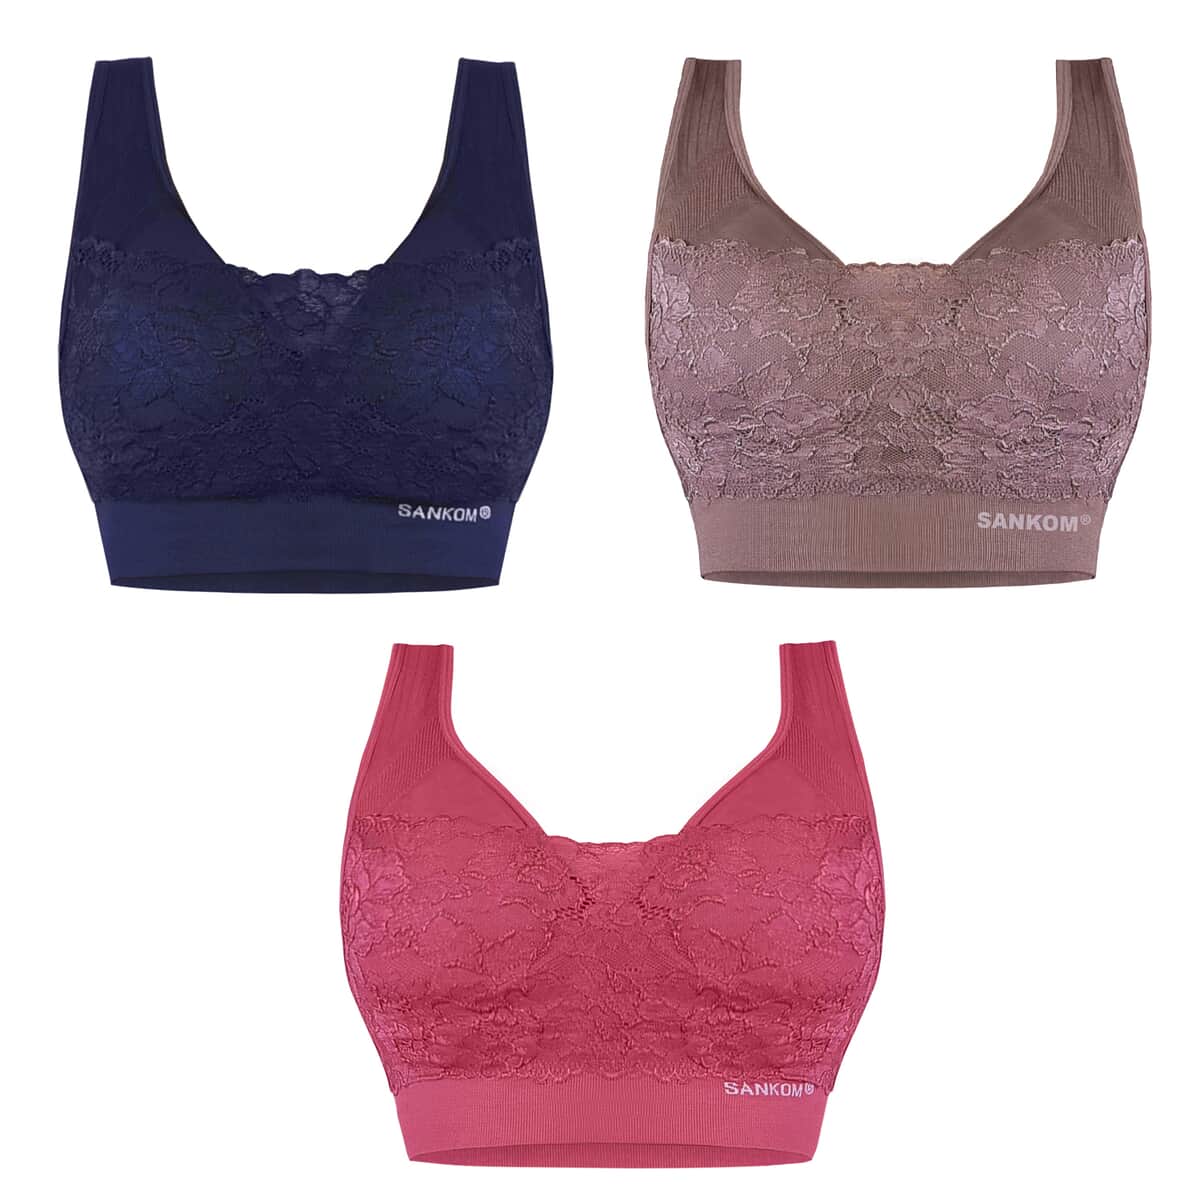 SANKOM Set of 3 Patent Classic Support & Posture Lace Bras - S/M , Navy, Cocoa, and Rose image number 0